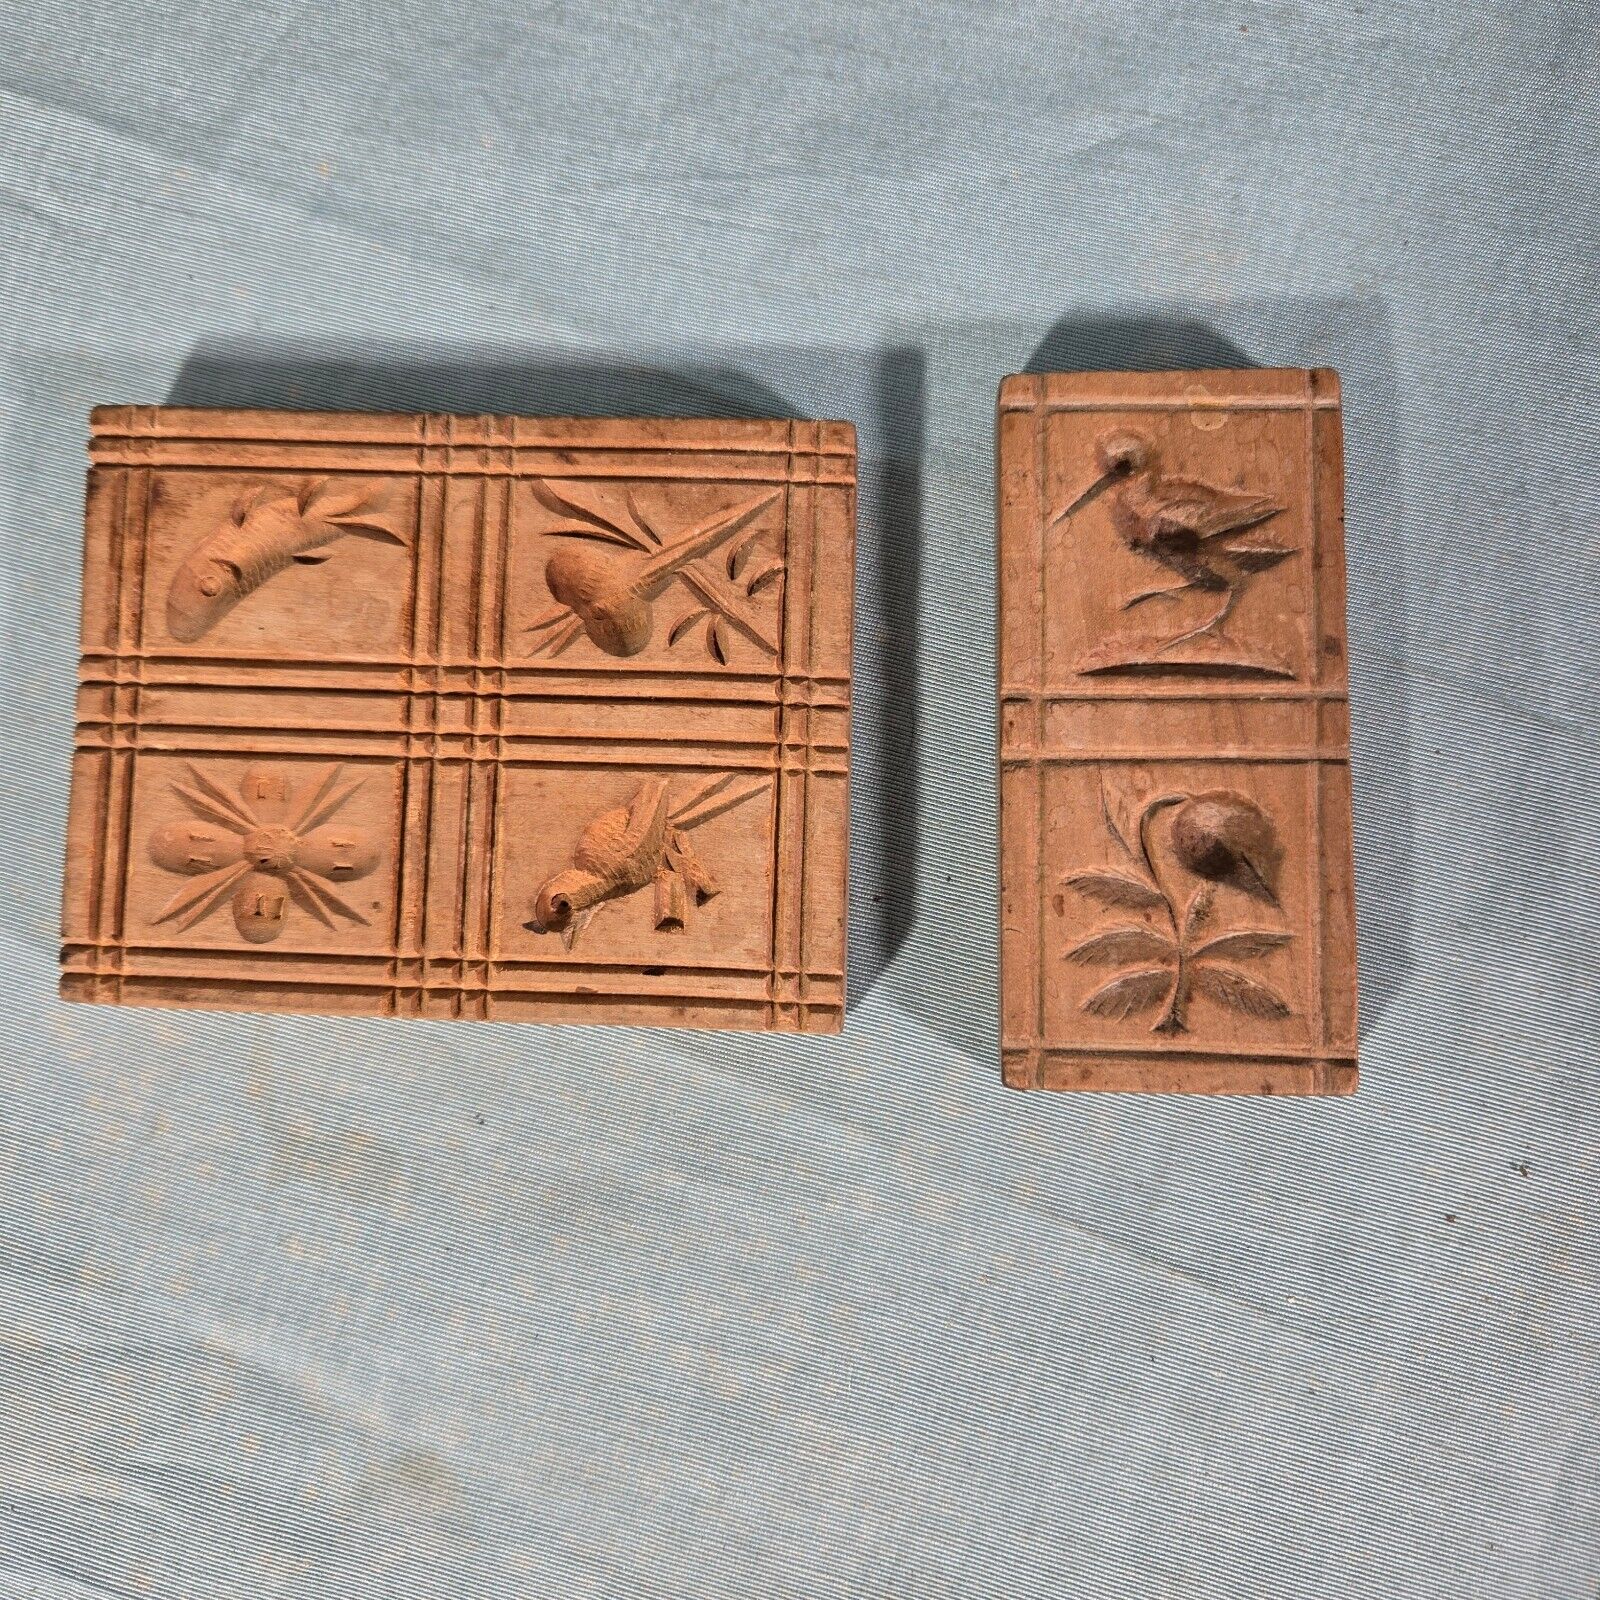 2 Antique Carved Wood Springerle Cookie Butter Molds Stamp Press Made in Germany